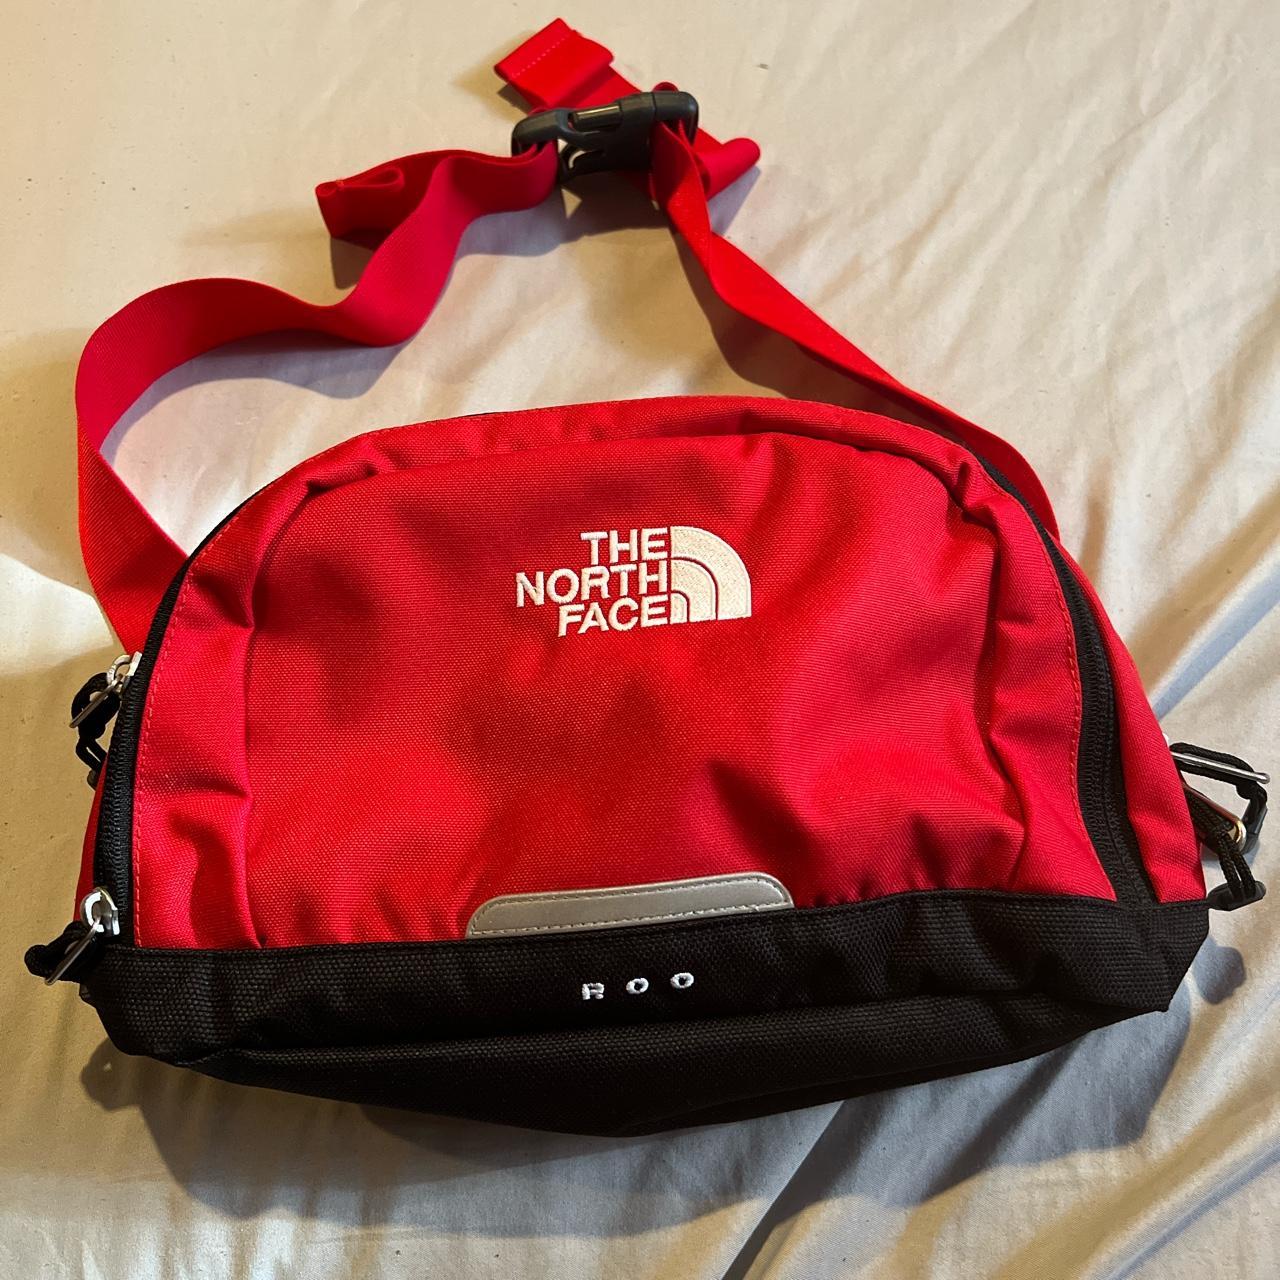 The North Face Men's Red and Black Bag